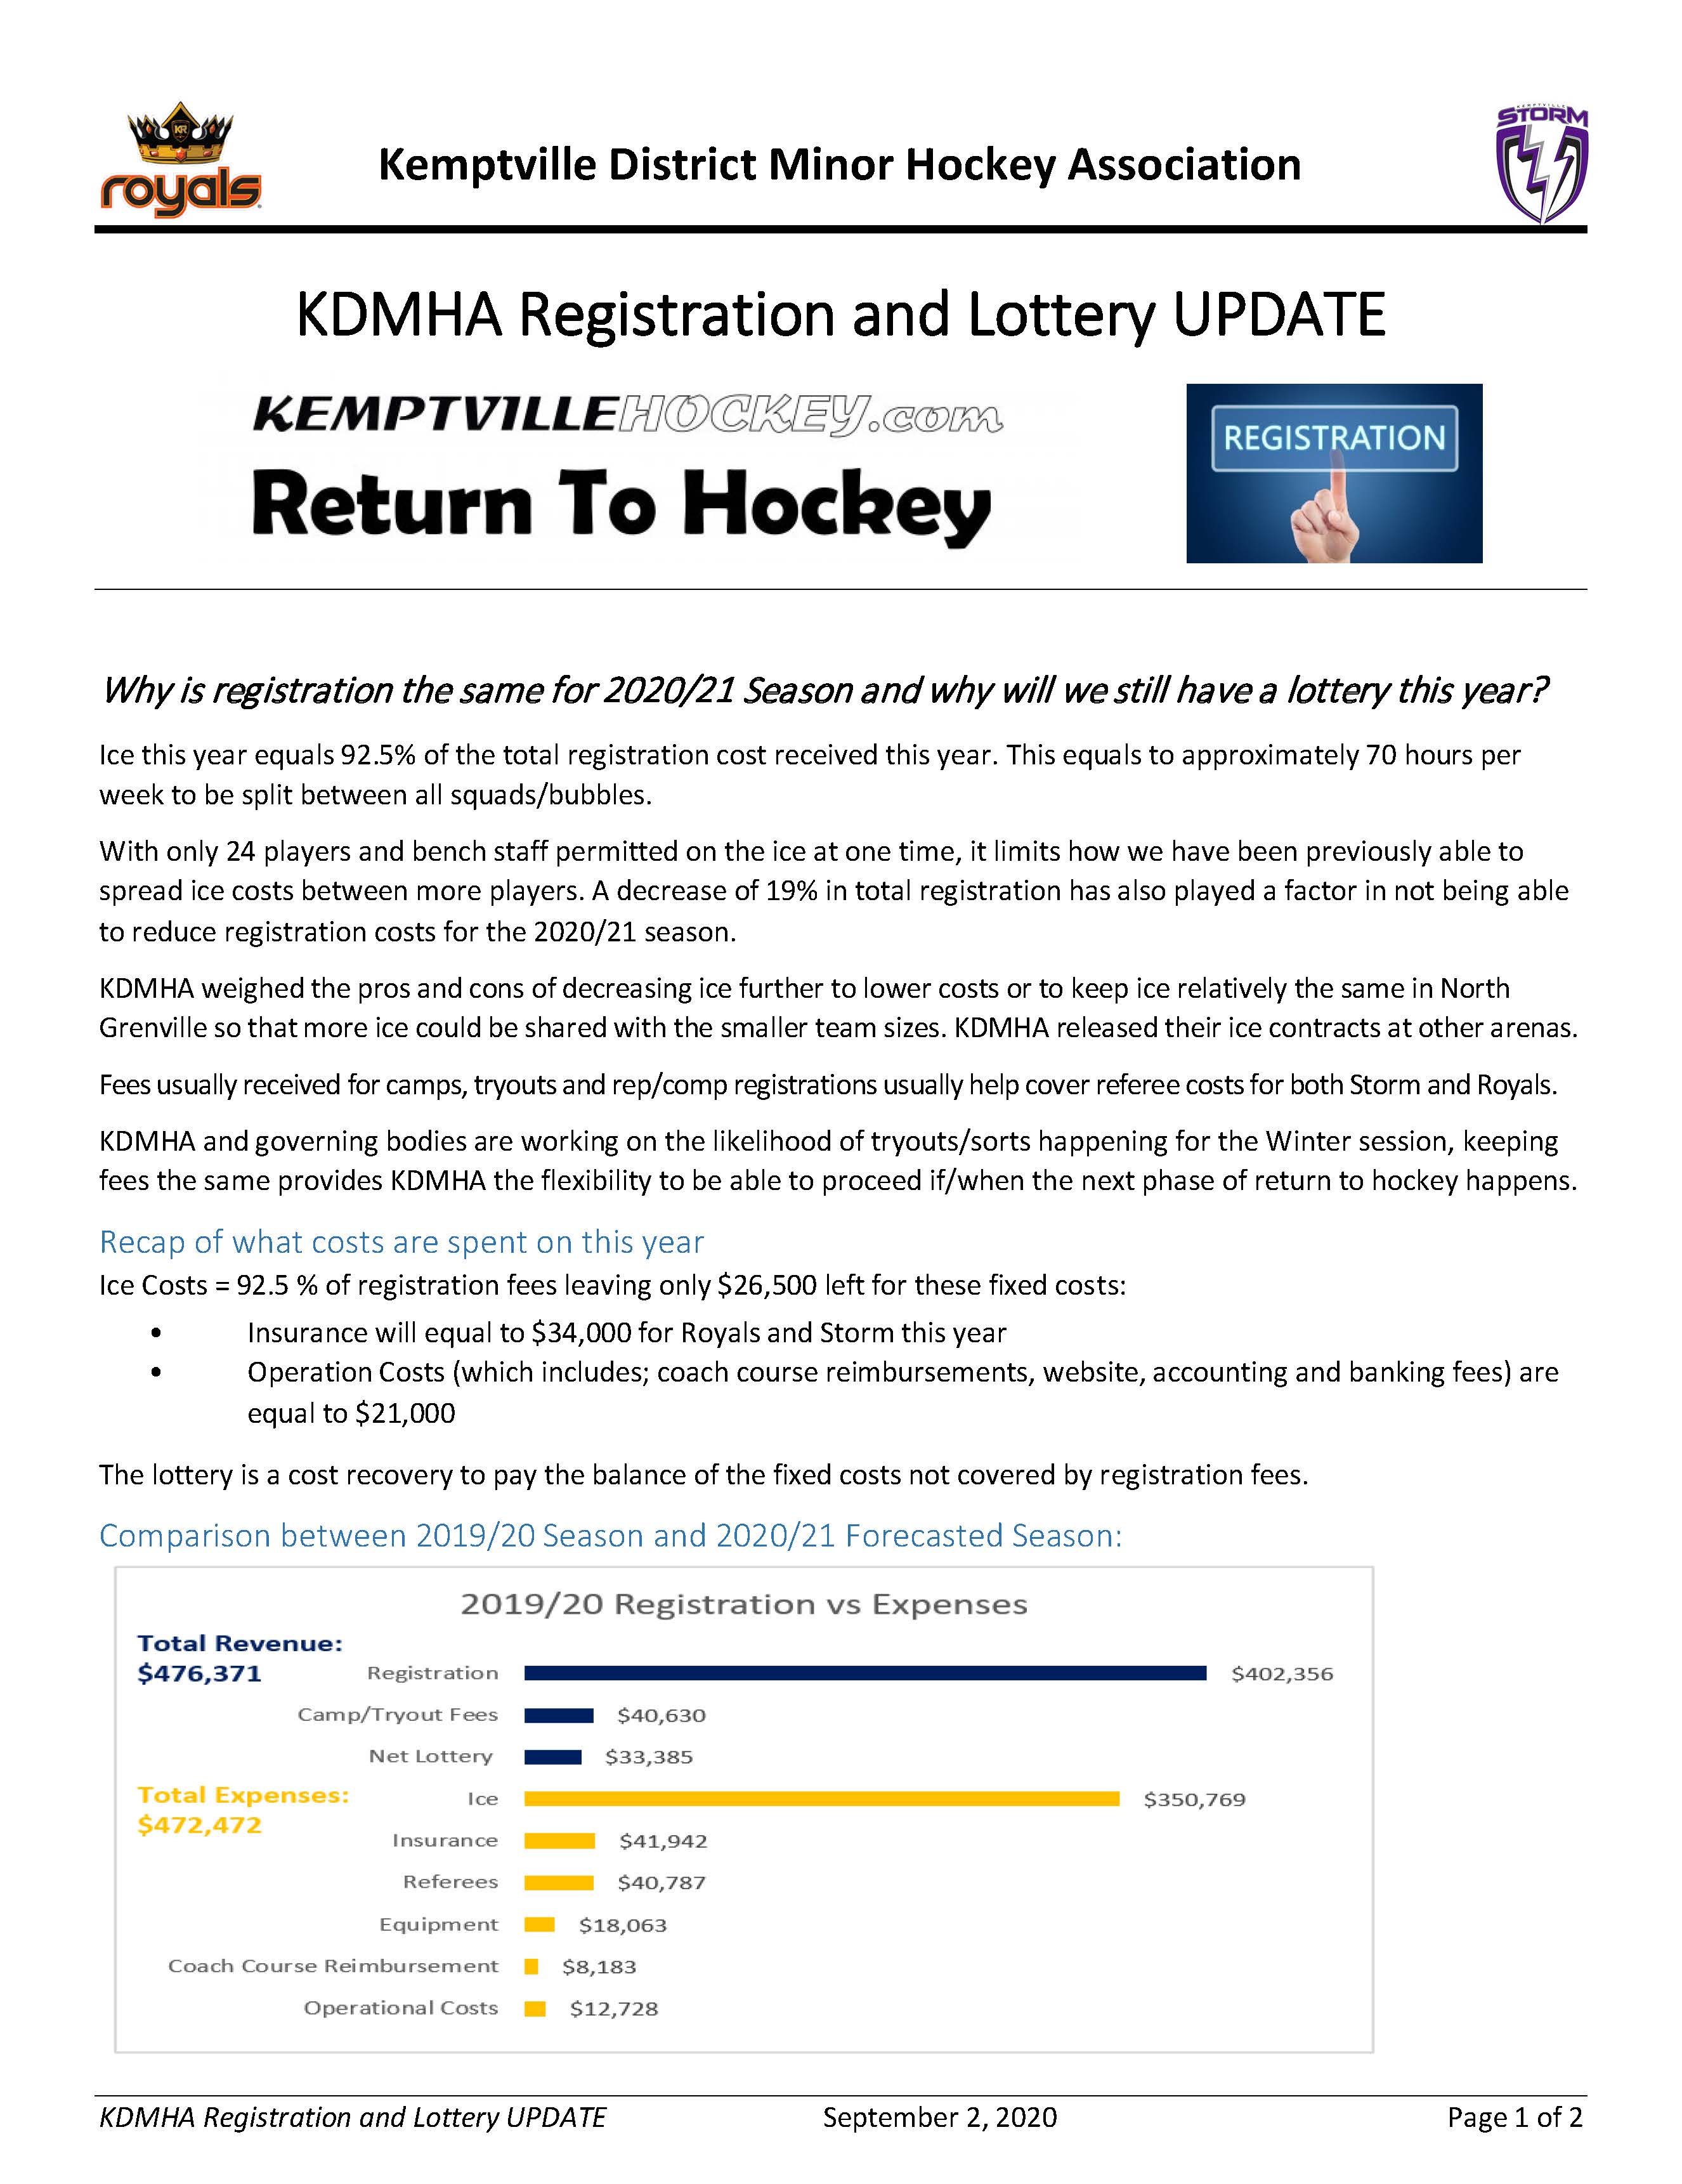 KDMHA Registration and Lottery UPDATE